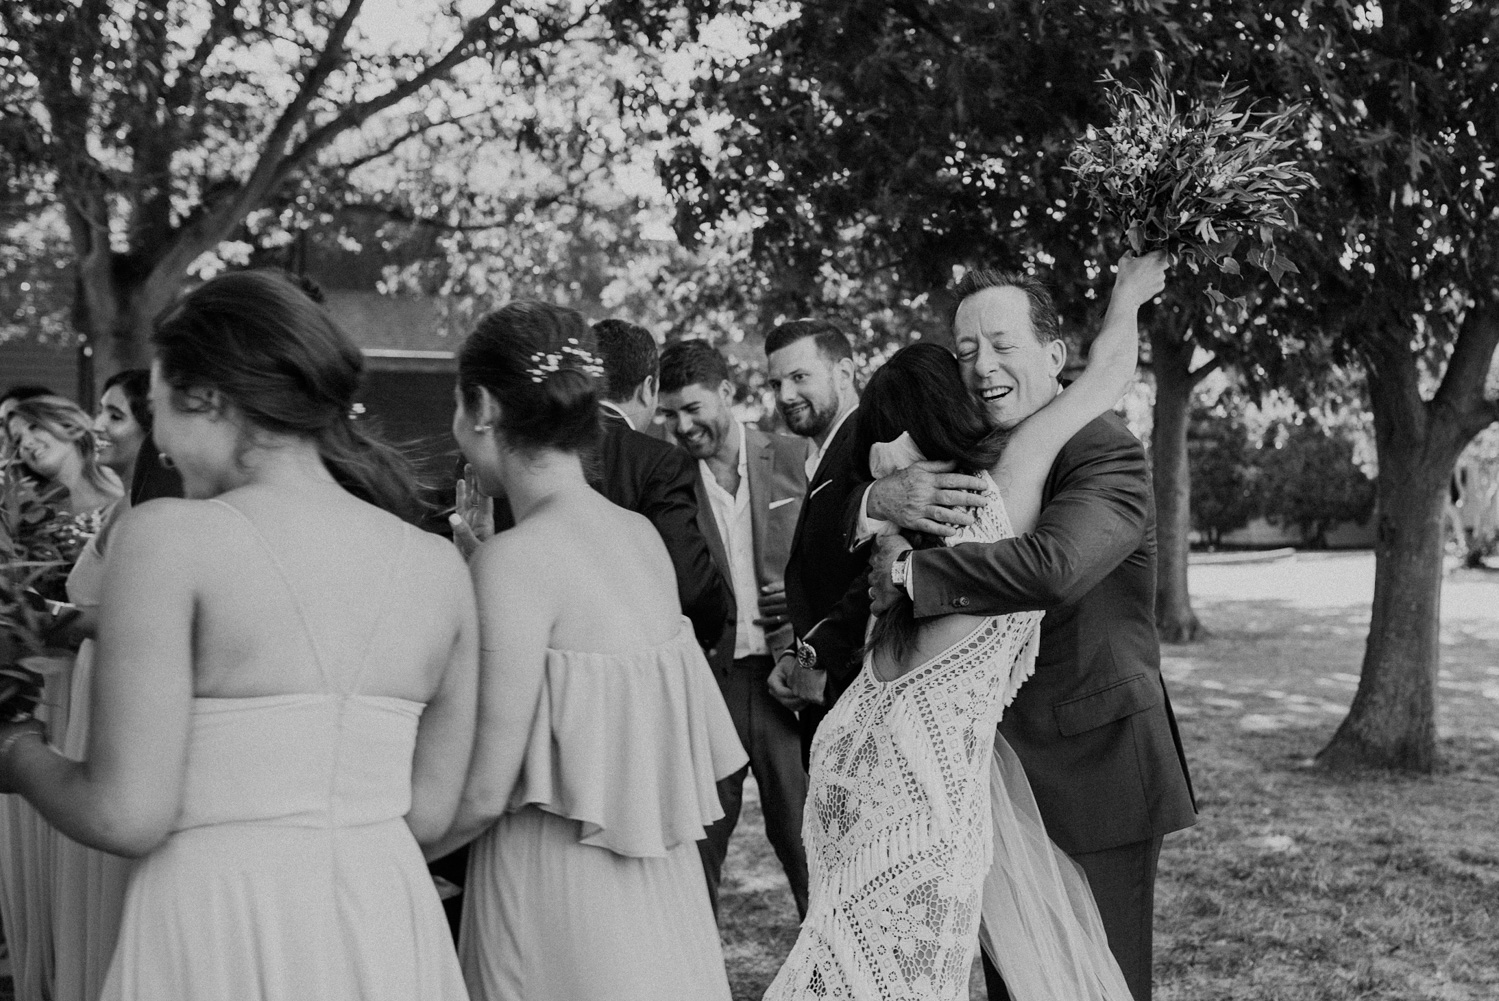 bride embraces her new father-in-law at the end of the wedding ceremony